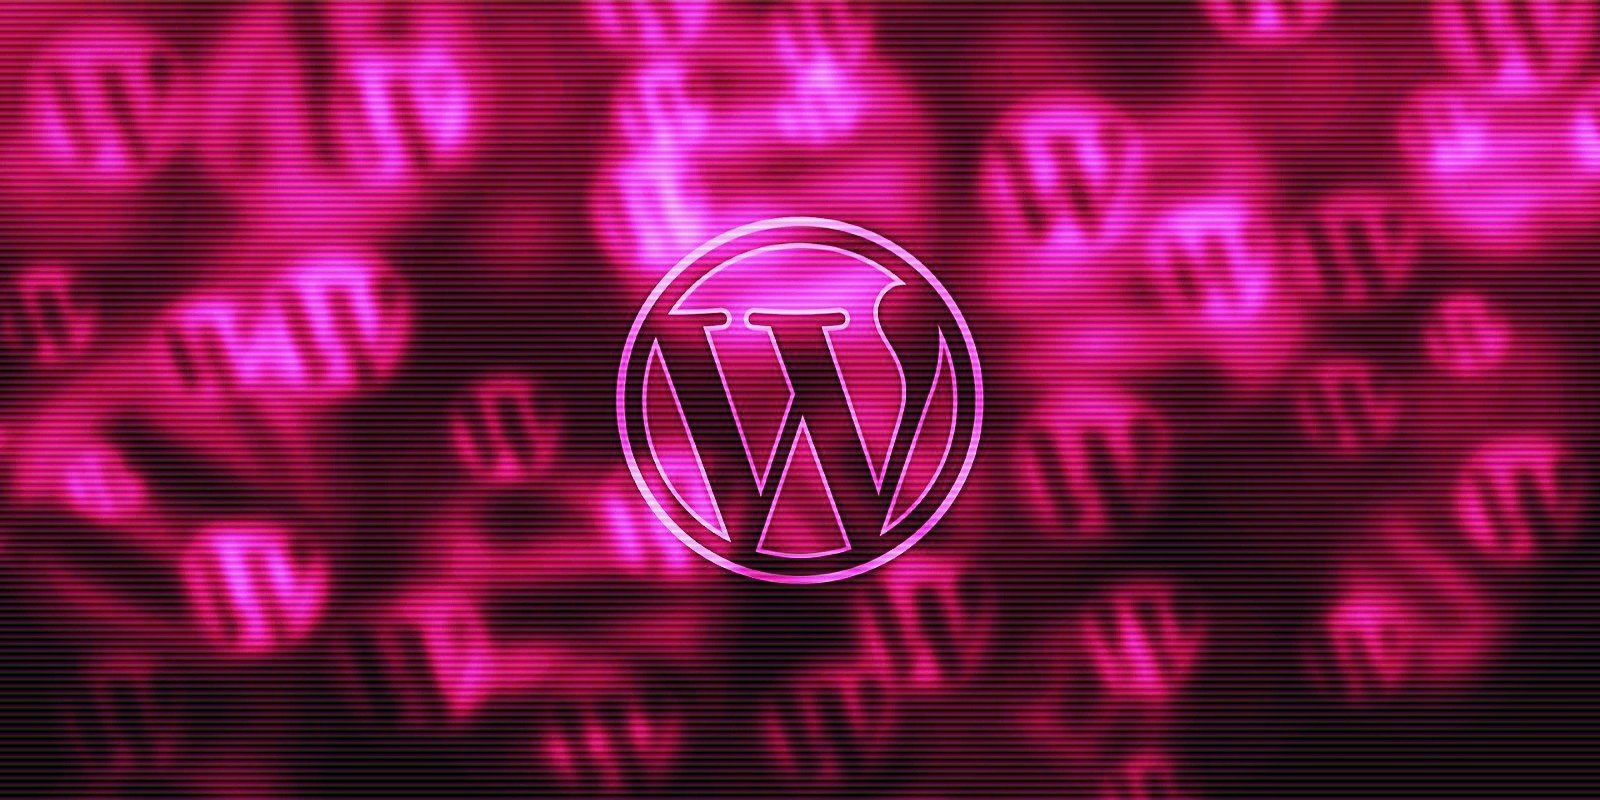 WordPress plugin ‘Gravity Forms’ vulnerable to PHP object injection – Source: www.bleepingcomputer.com